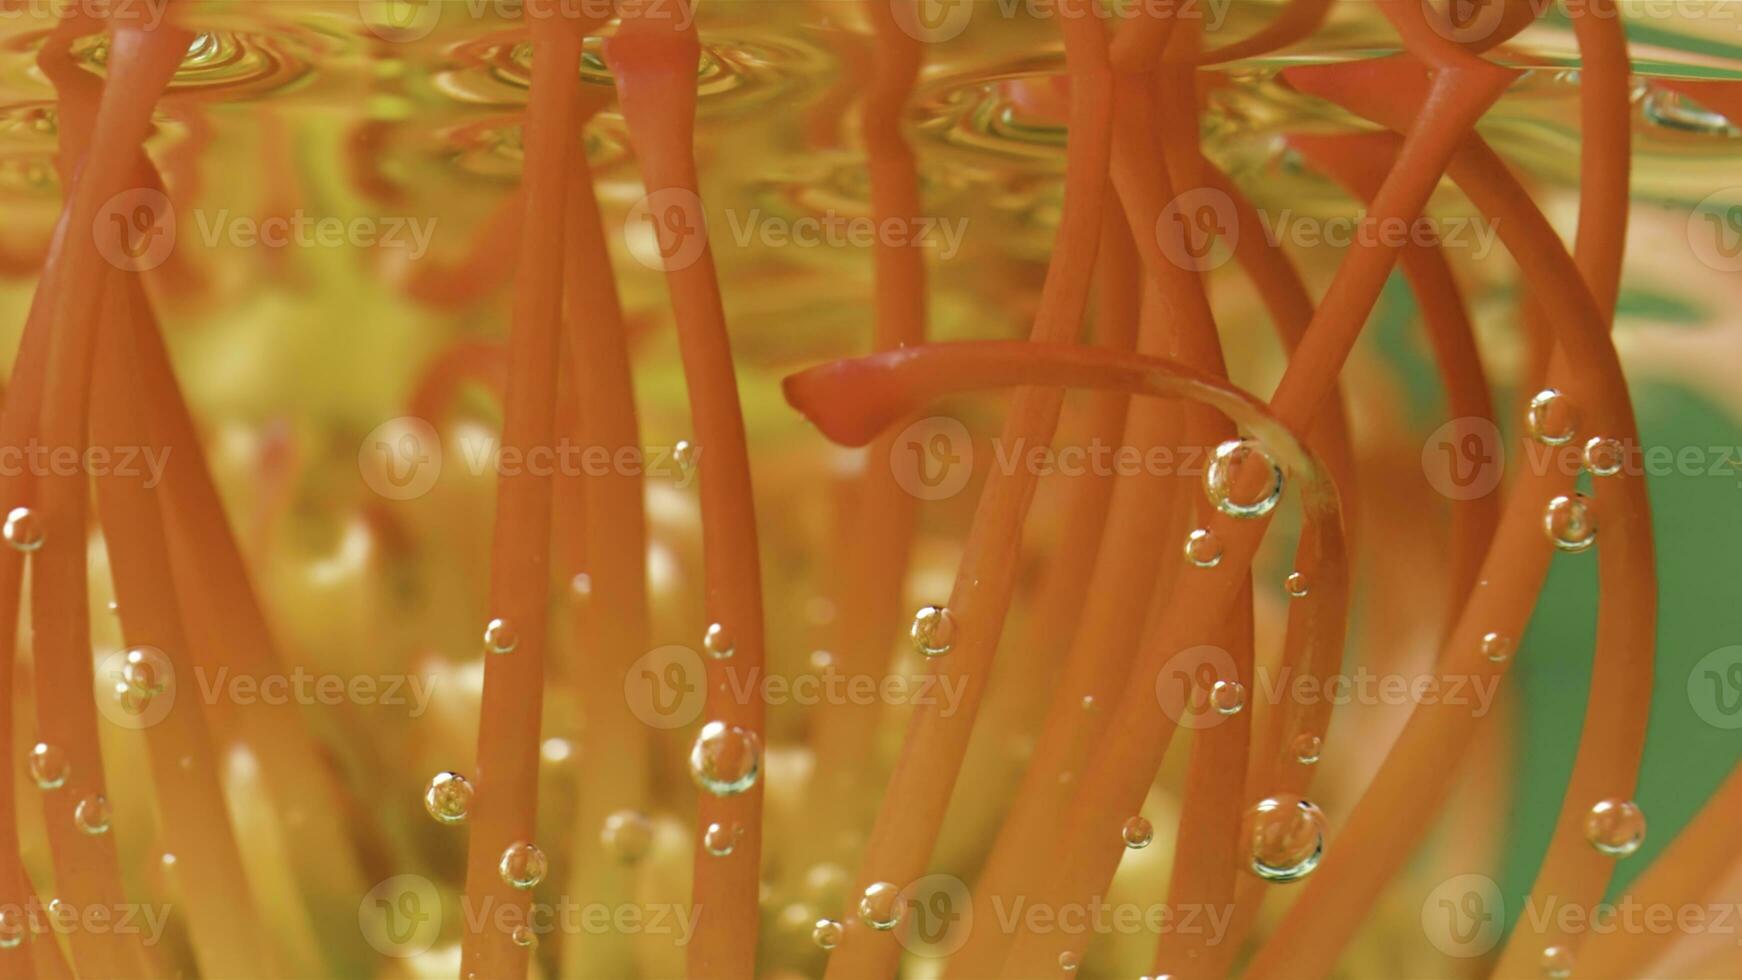 Close up of unusual bright orange flower bud in transparent calm water. Stock footage. Concept of floristry art. photo